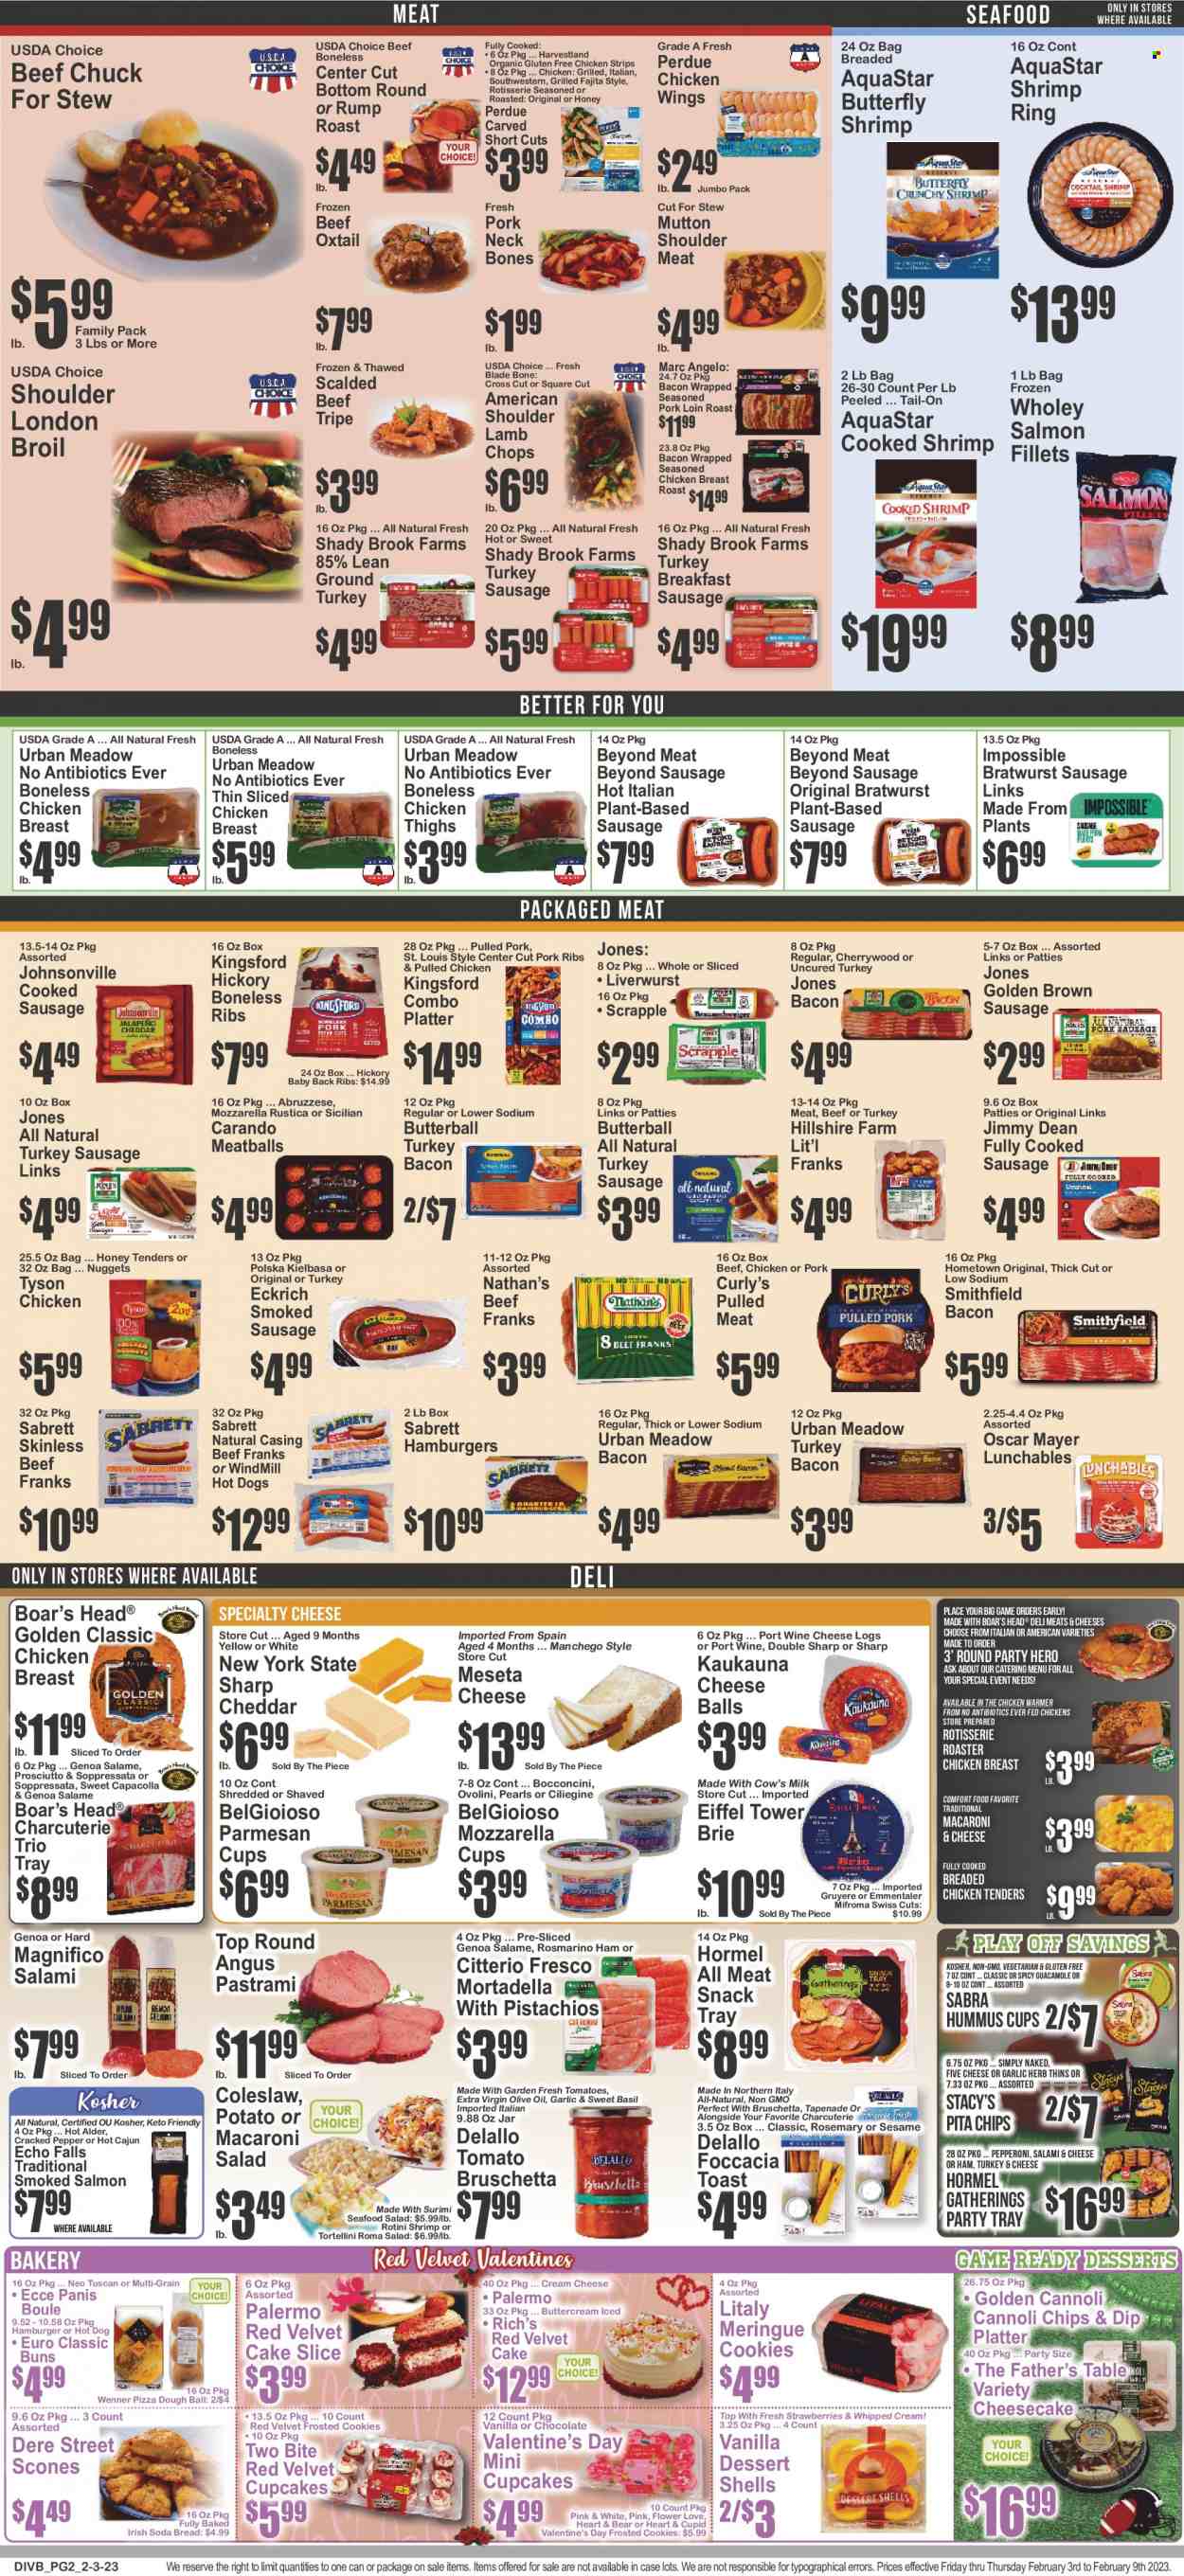 thumbnail - Food Universe Flyer - 02/03/2023 - 02/09/2023 - Sales products - bread, cake, buns, soda bread, Father's Table, cupcake, cheesecake, dessert shells, salad, salmon, smoked salmon, seafood, shrimps, coleslaw, macaroni & cheese, hot dog, meatballs, nuggets, hamburger, tortellini, fajita, Perdue®, Lunchables, pulled pork, pulled chicken, Jimmy Dean, Hormel, Kingsford, bruschetta, bacon, Butterball, mortadella, salami, soppressata, turkey bacon, Hillshire Farm, prosciutto, pastrami, Johnsonville, Oscar Mayer, bratwurst, sausage, smoked sausage, pepperoni, kielbasa, hummus, guacamole, macaroni salad, seafood salad, bocconcini, cream cheese, Gruyere, Manchego, parmesan, brie, milk, whipped cream, dip, pizza dough, chicken wings, strips, chicken strips, cookies, snack, Thins, pita chips, rosemary, extra virgin olive oil, olive oil, oil, wine, port wine, ground turkey, chicken thighs, beef meat, beef tripe, oxtail, ribs, pork loin, pork meat, pork ribs, pork back ribs, lamb chops, lamb meat, mutton meat, cup. Page 2.